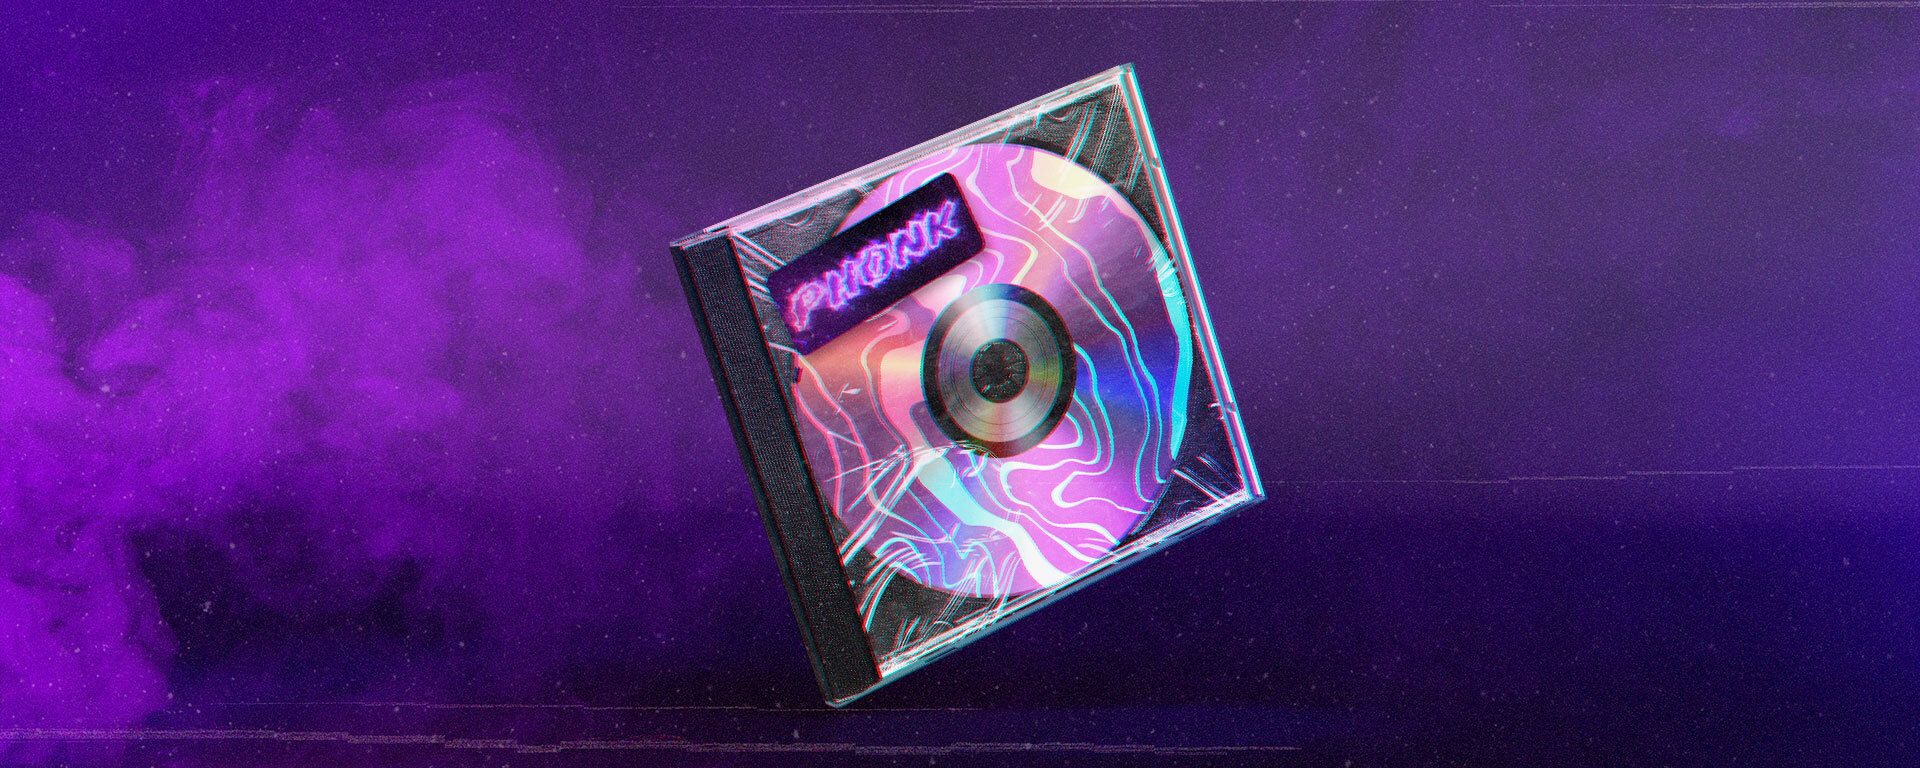 Image of a CD containing phonk music styled in the phonk aesthetic.